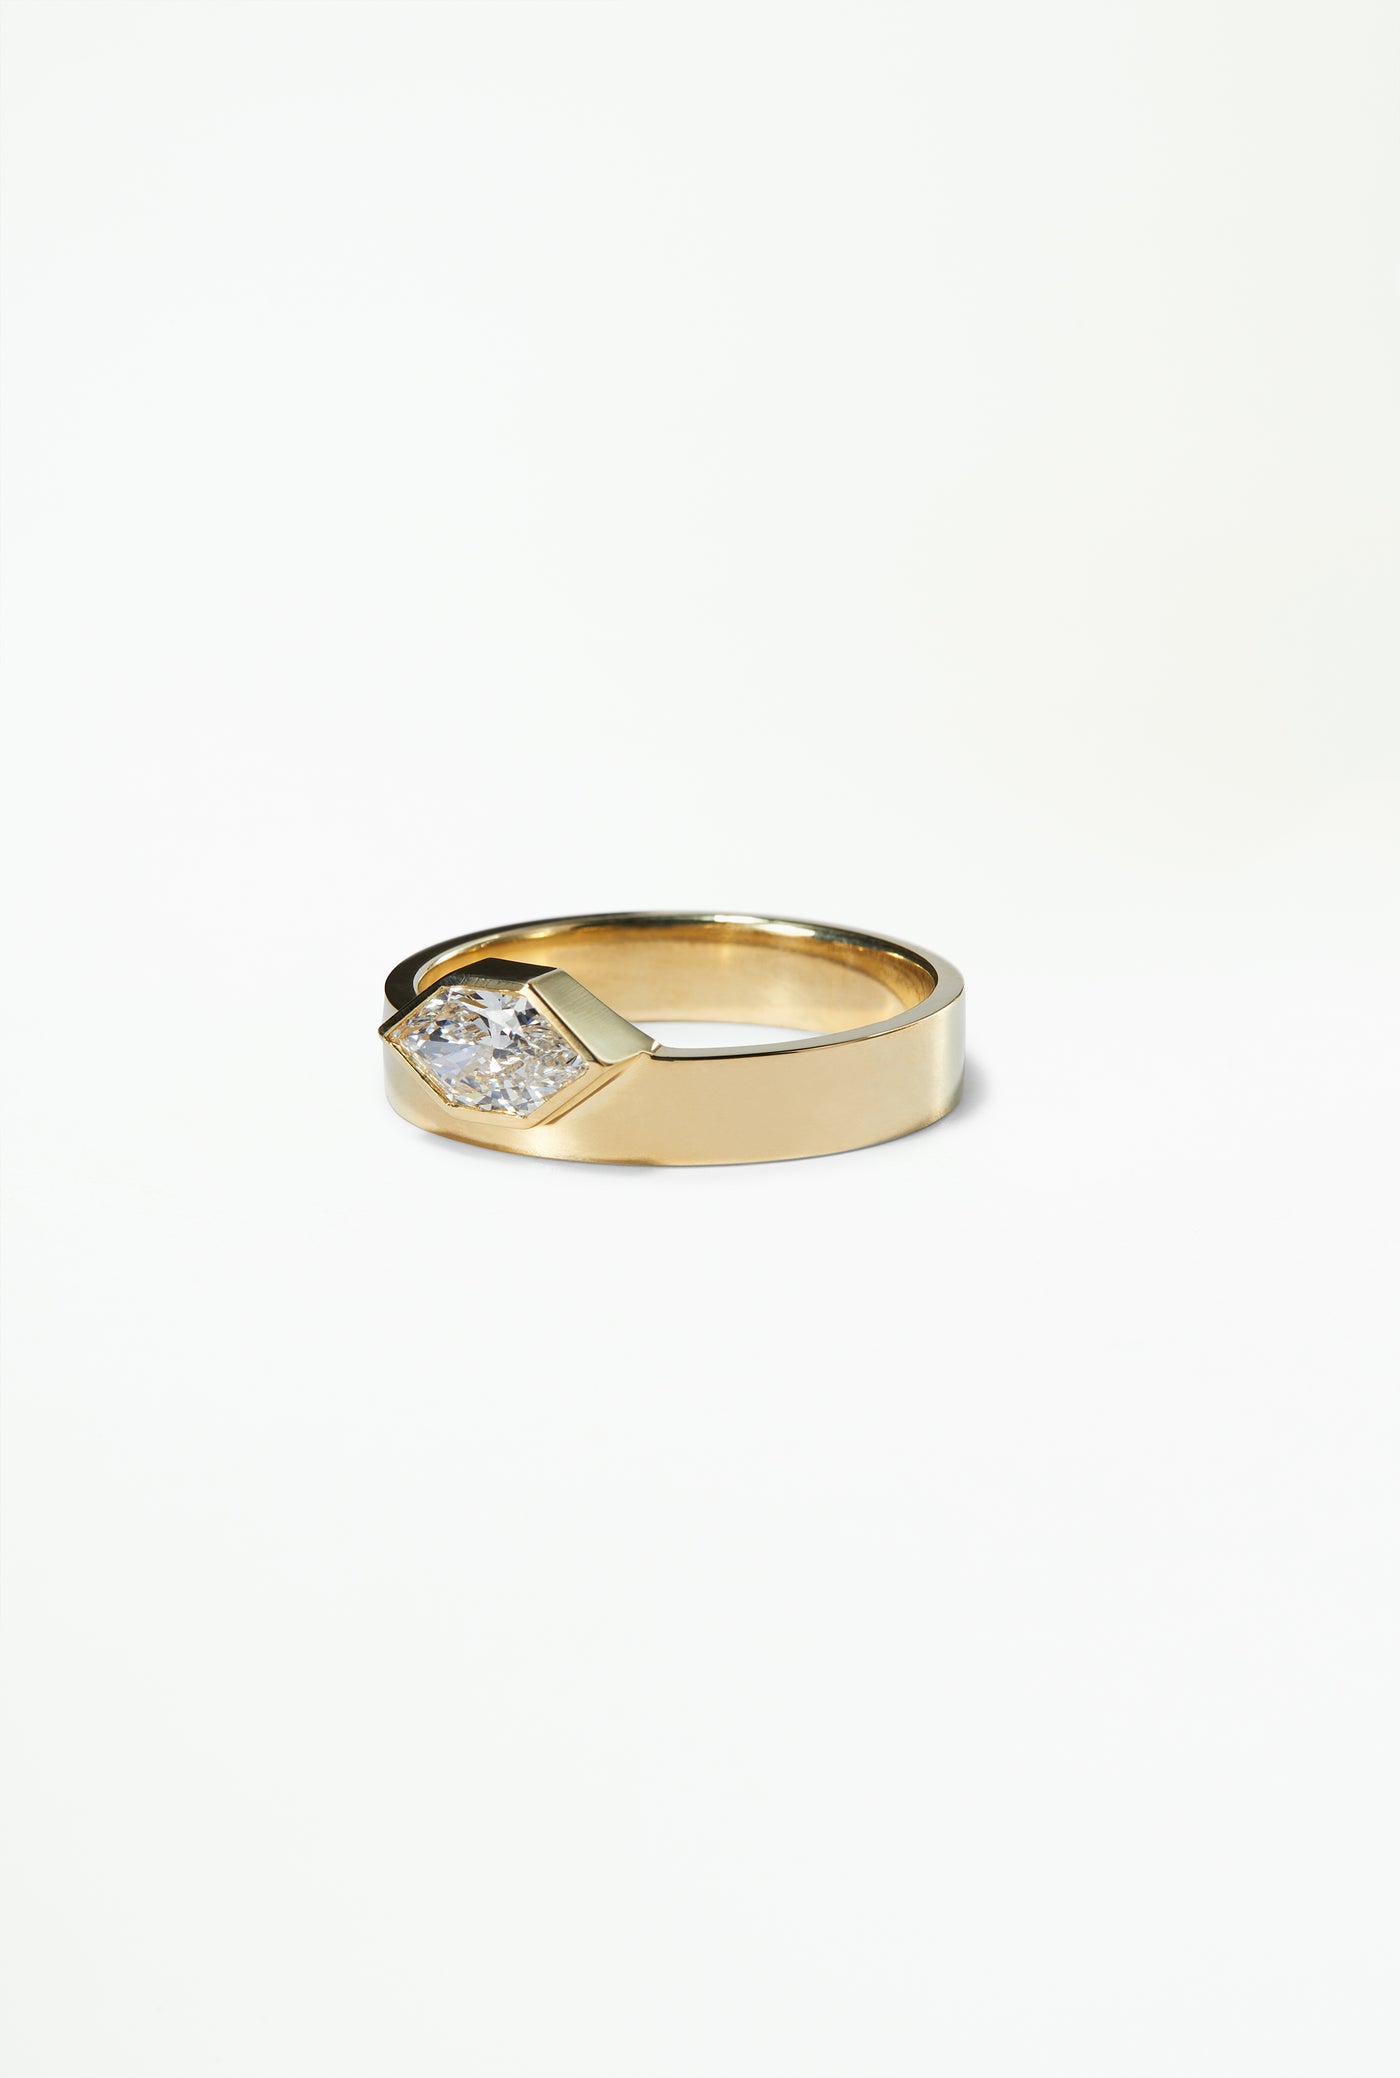 One of a Kind Elongated Hex Cut Diamond Monolith Ring